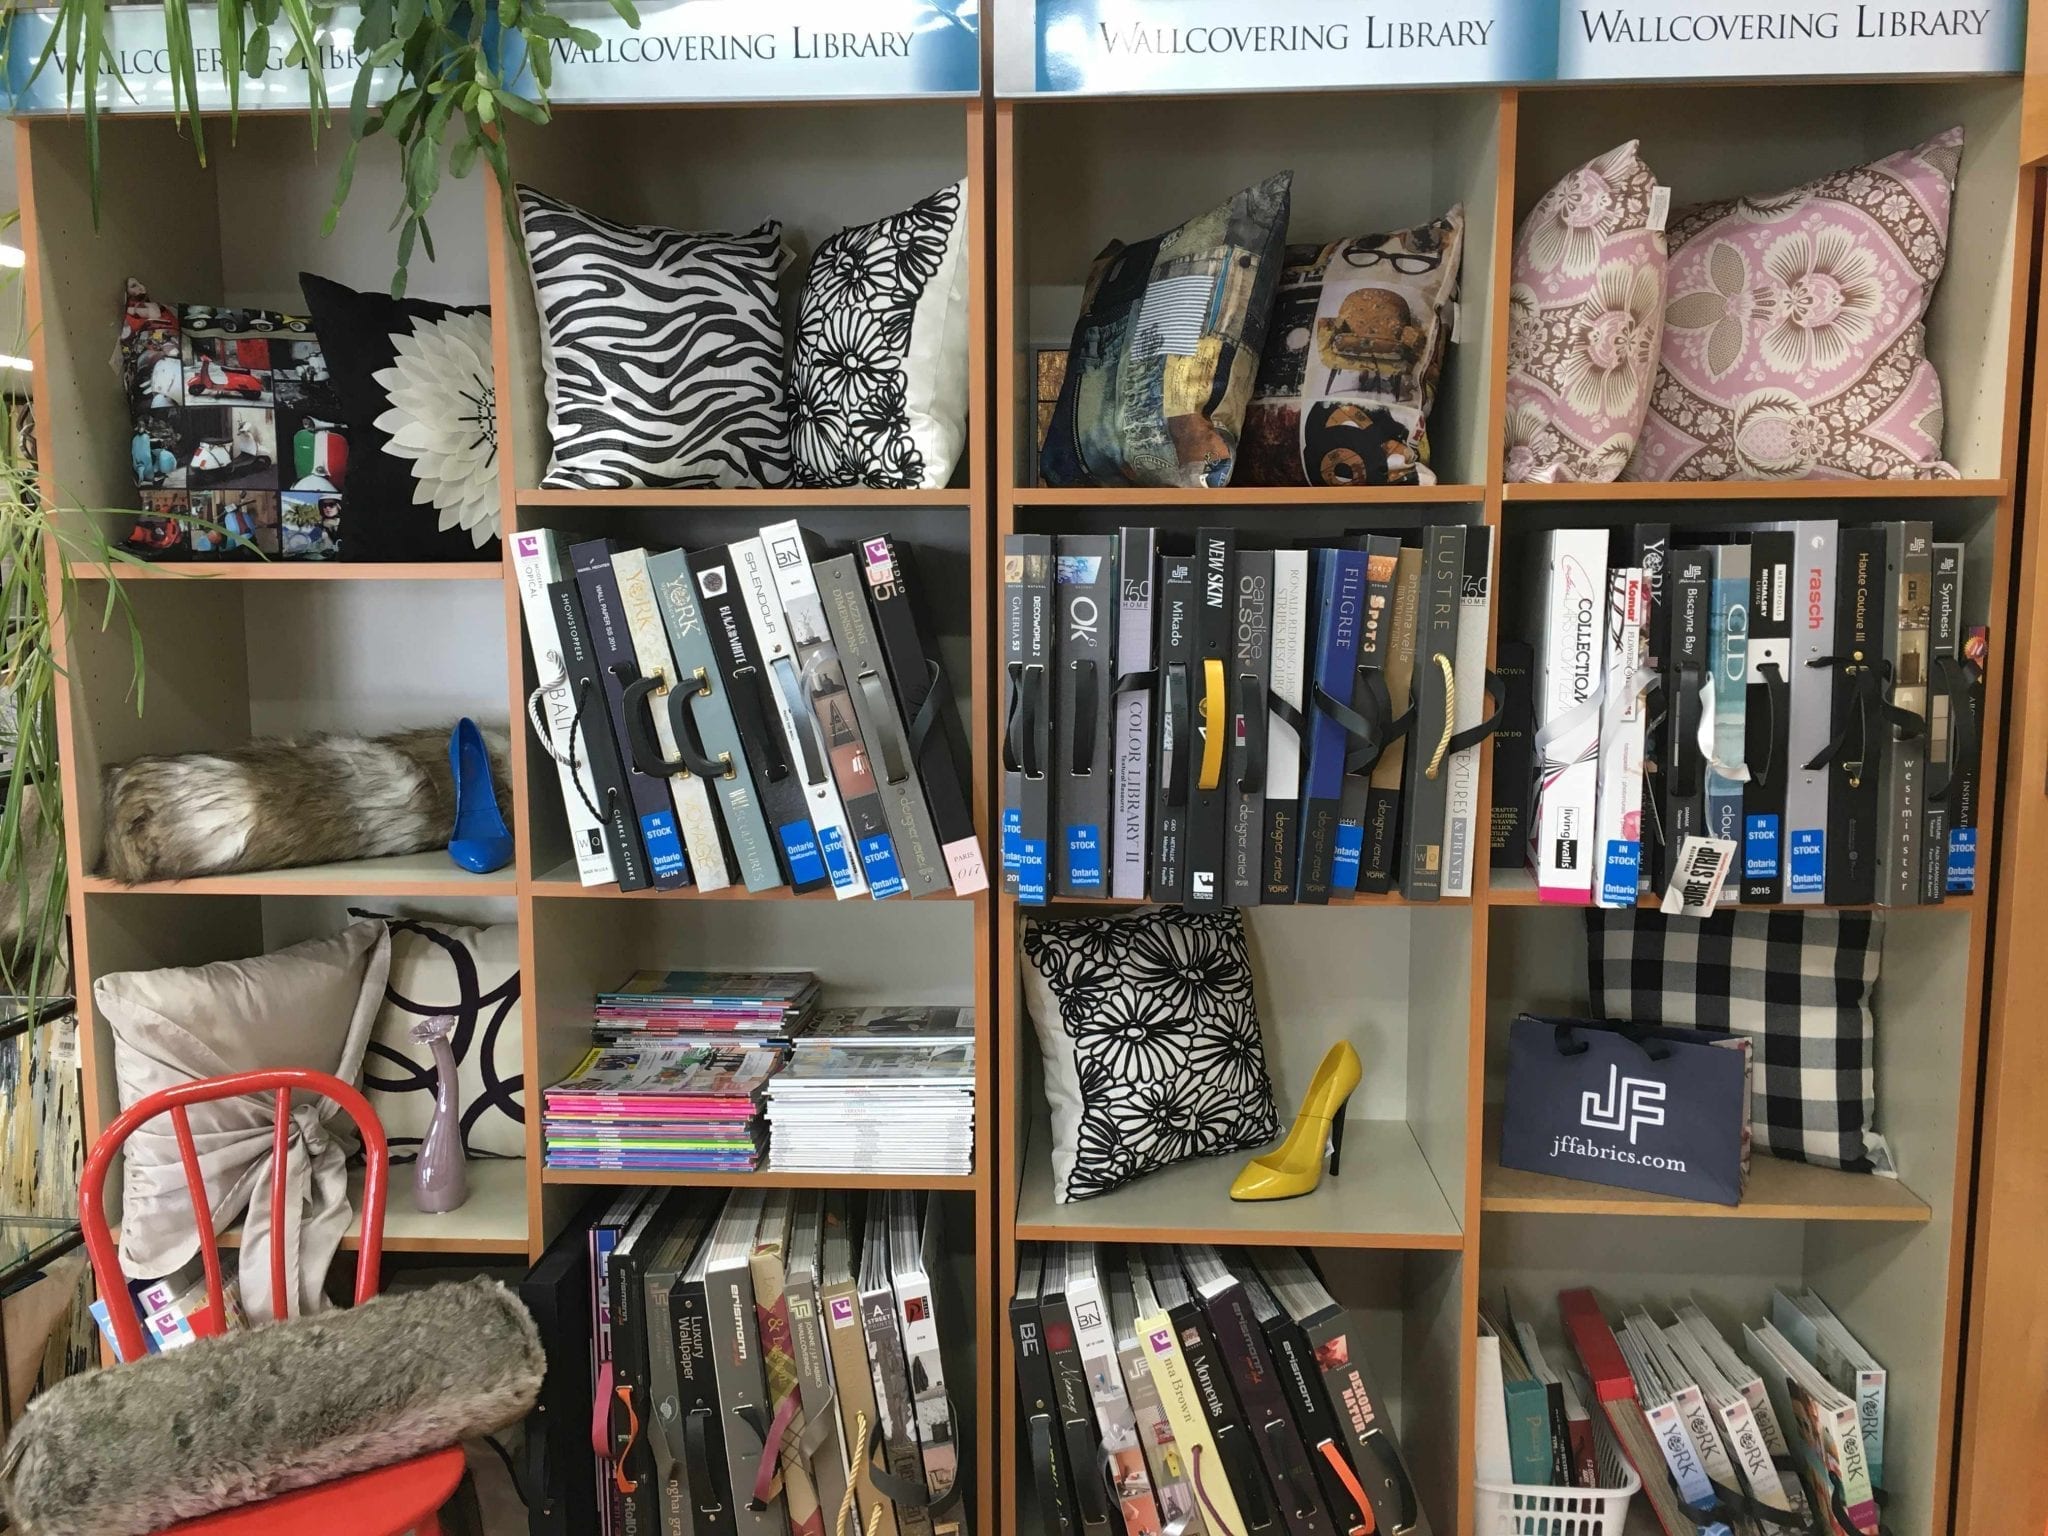 A variety of items showed in the wallcovering library